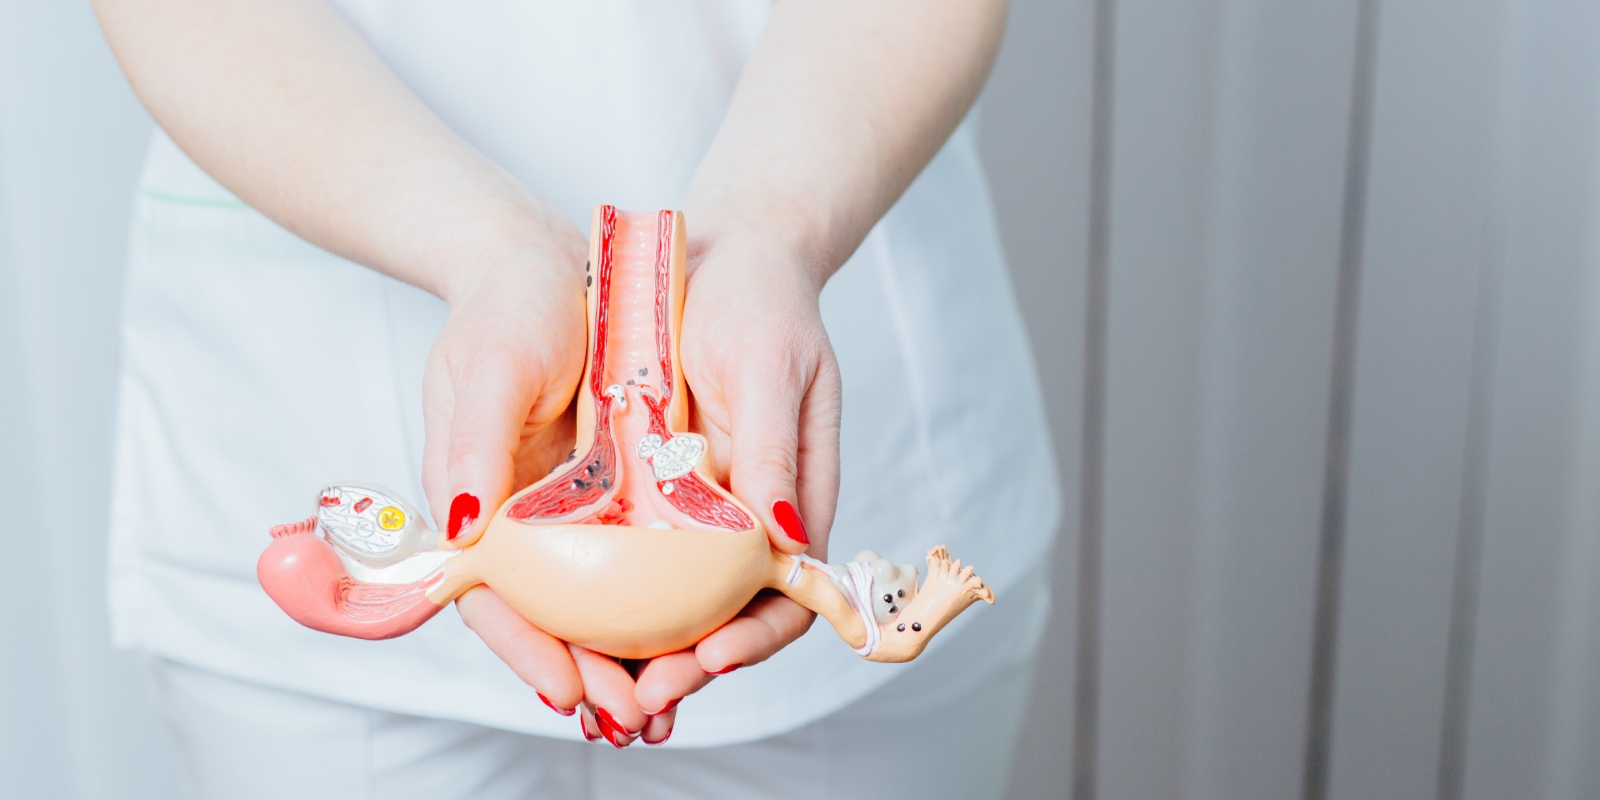 A gynecologist holding anatomical model of uterus showing causes of Endometriosis.